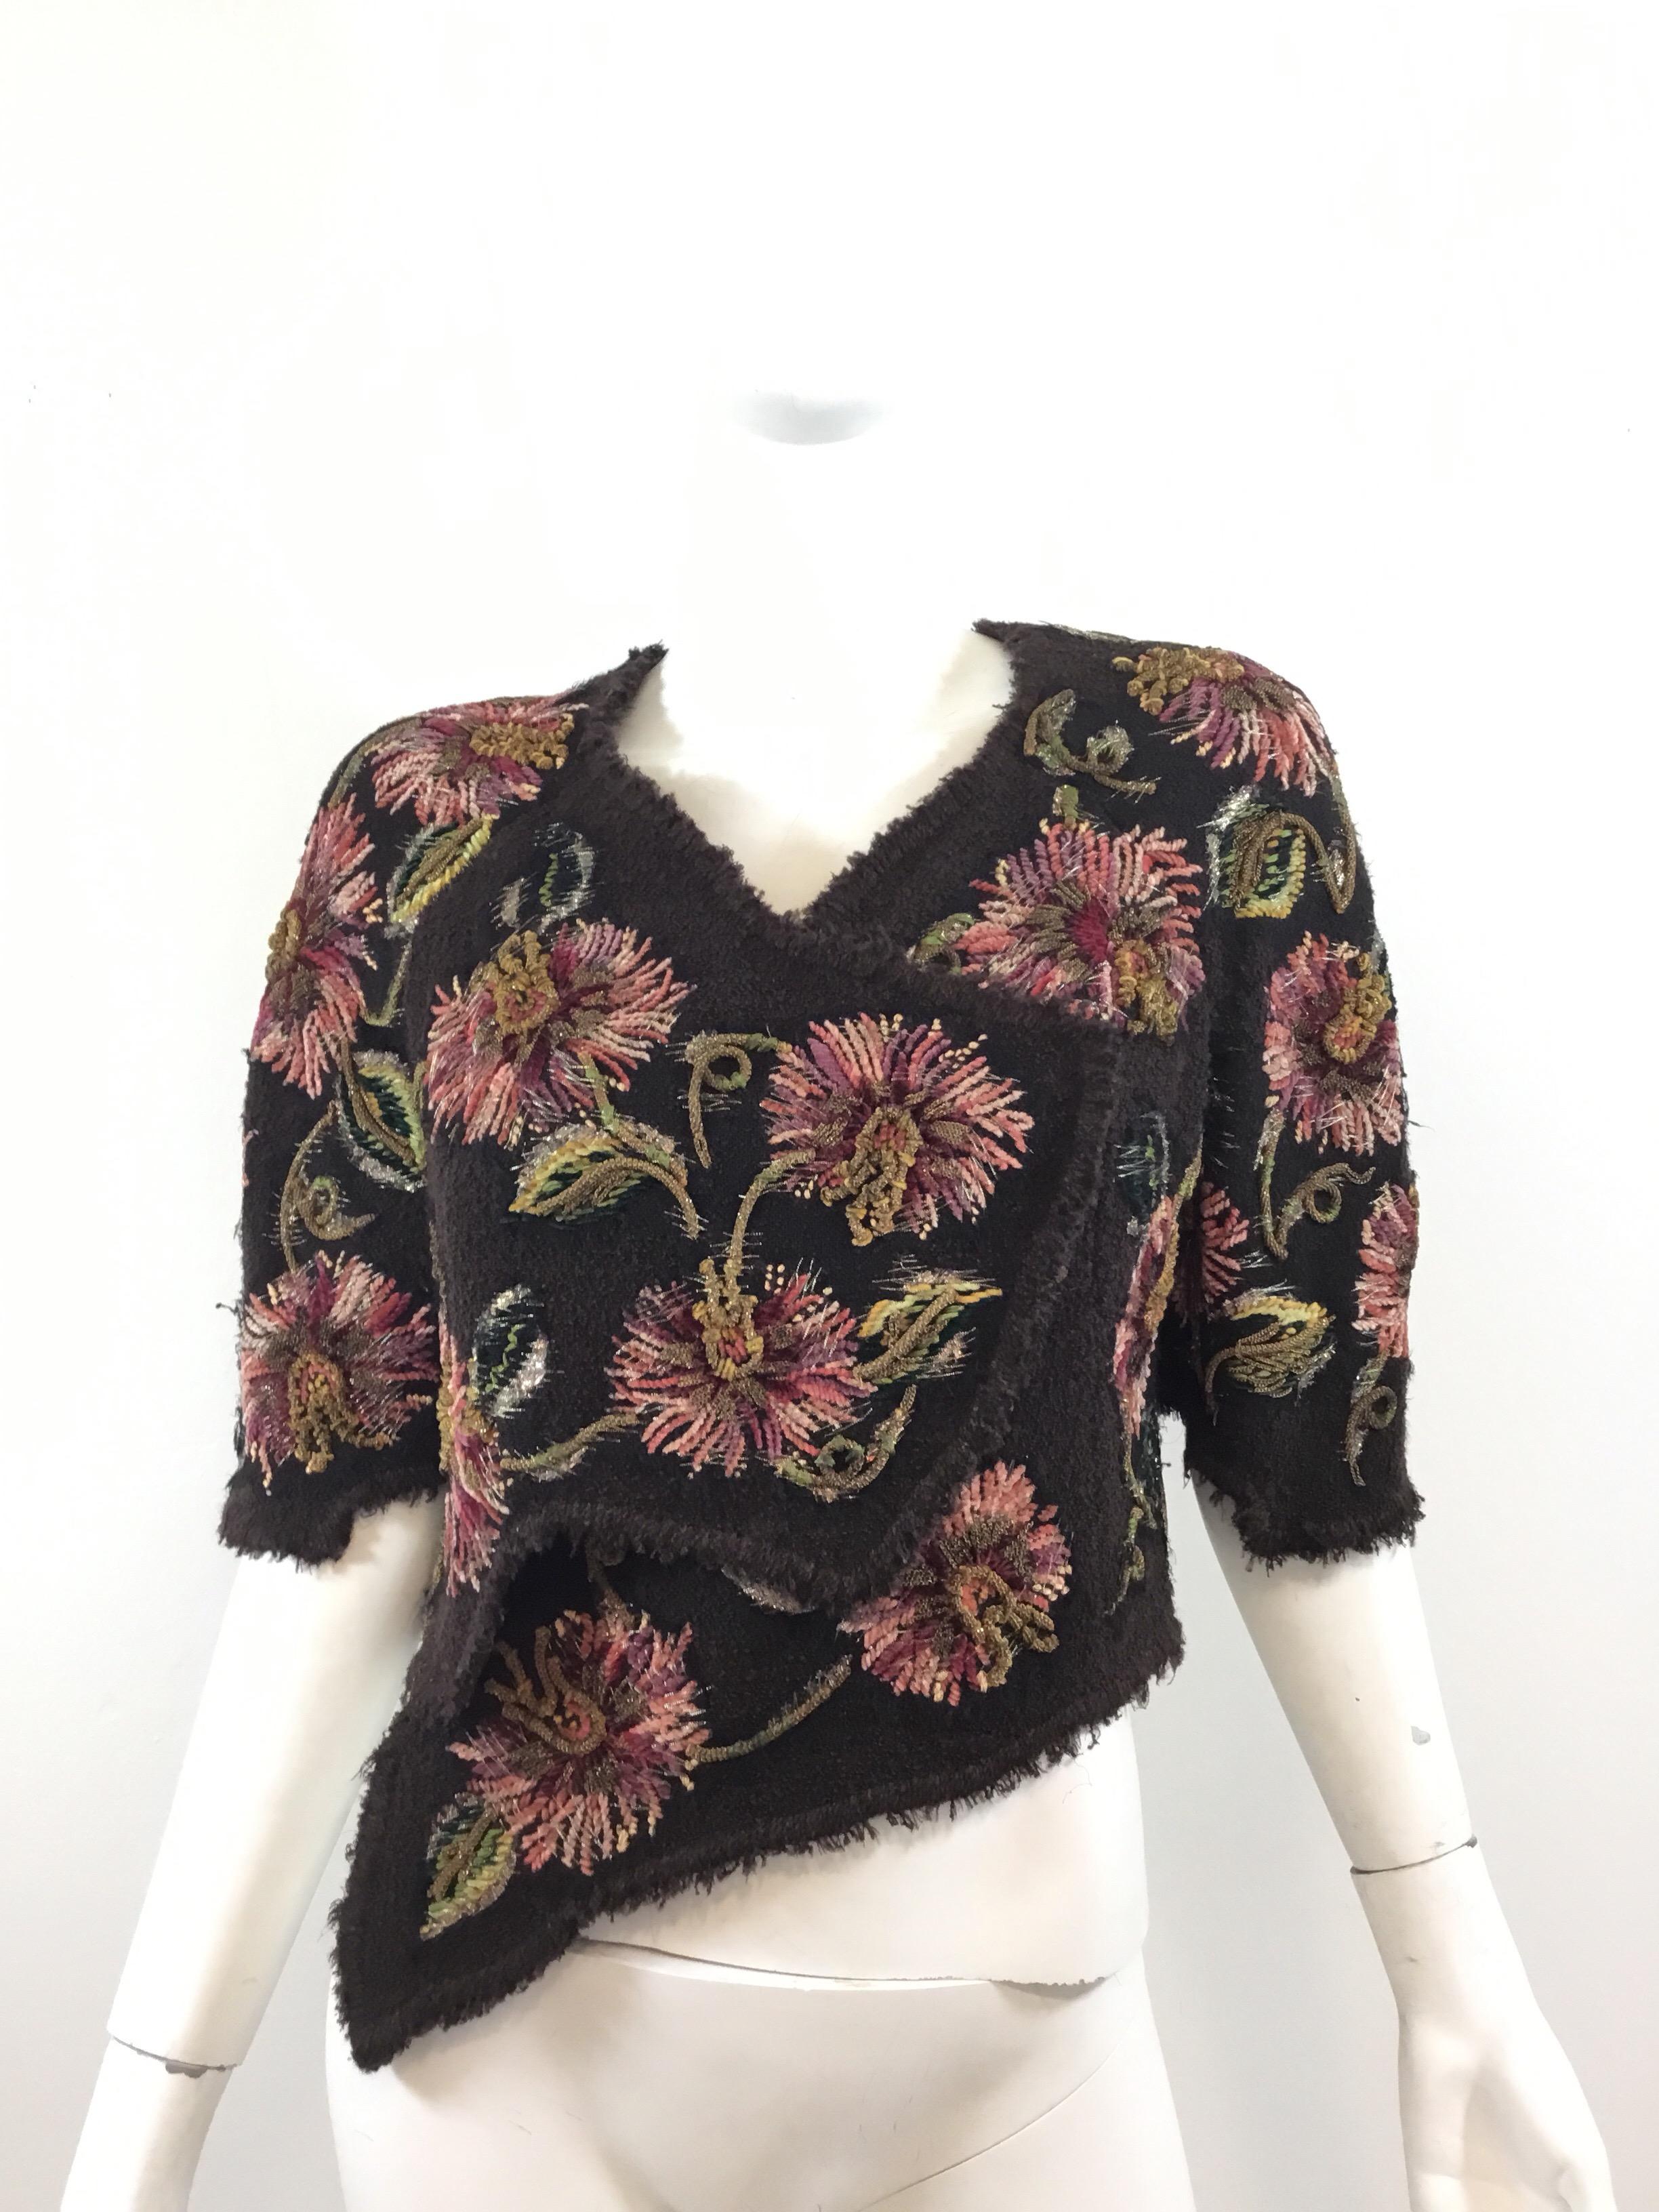 Amazing and rare Chanel Lessage embroidered tweed bolero jacket featured in a brown, wool fabric with chainwork and lamé threading throughout the floral detail. Bolero is fully lined and has concealed snap fastenings. Excellent vintage condition.